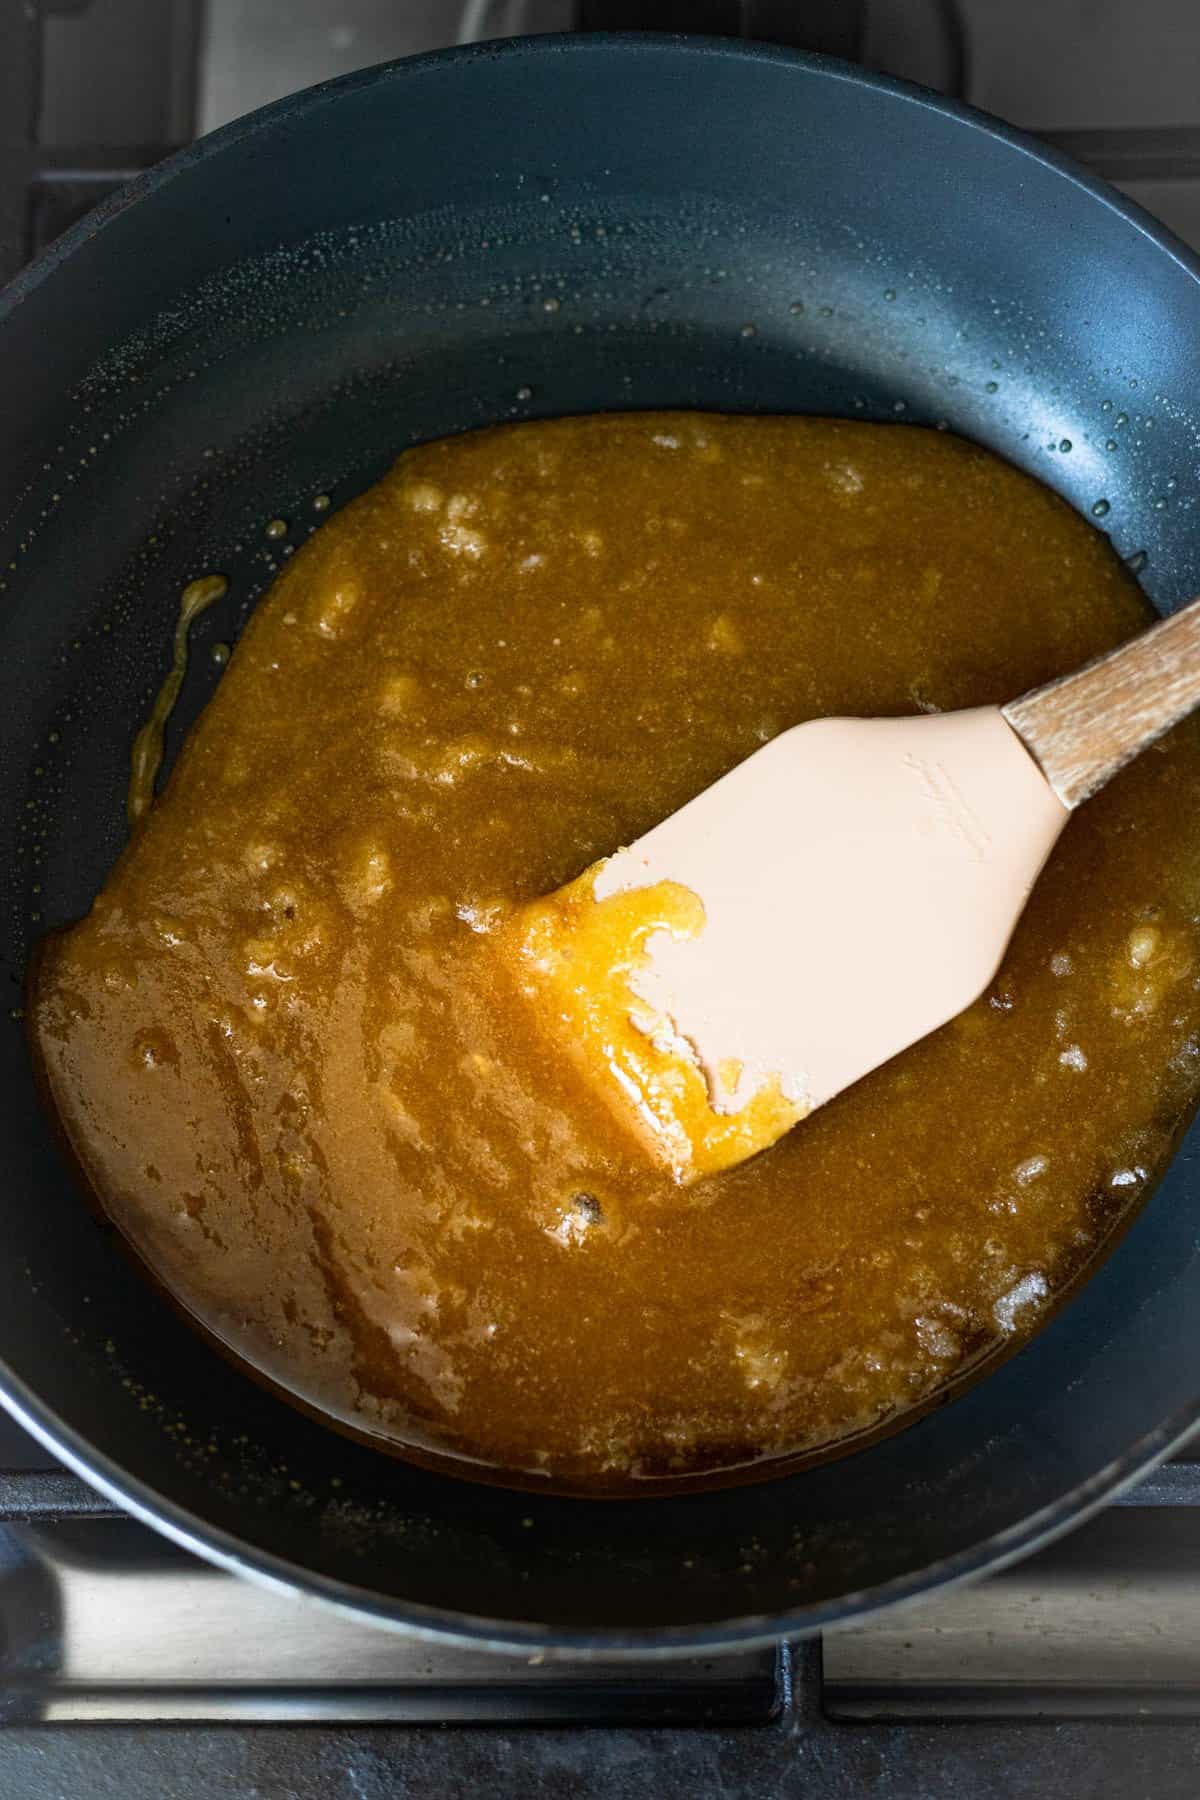 sugar turning into liquid state in a non-stick pan